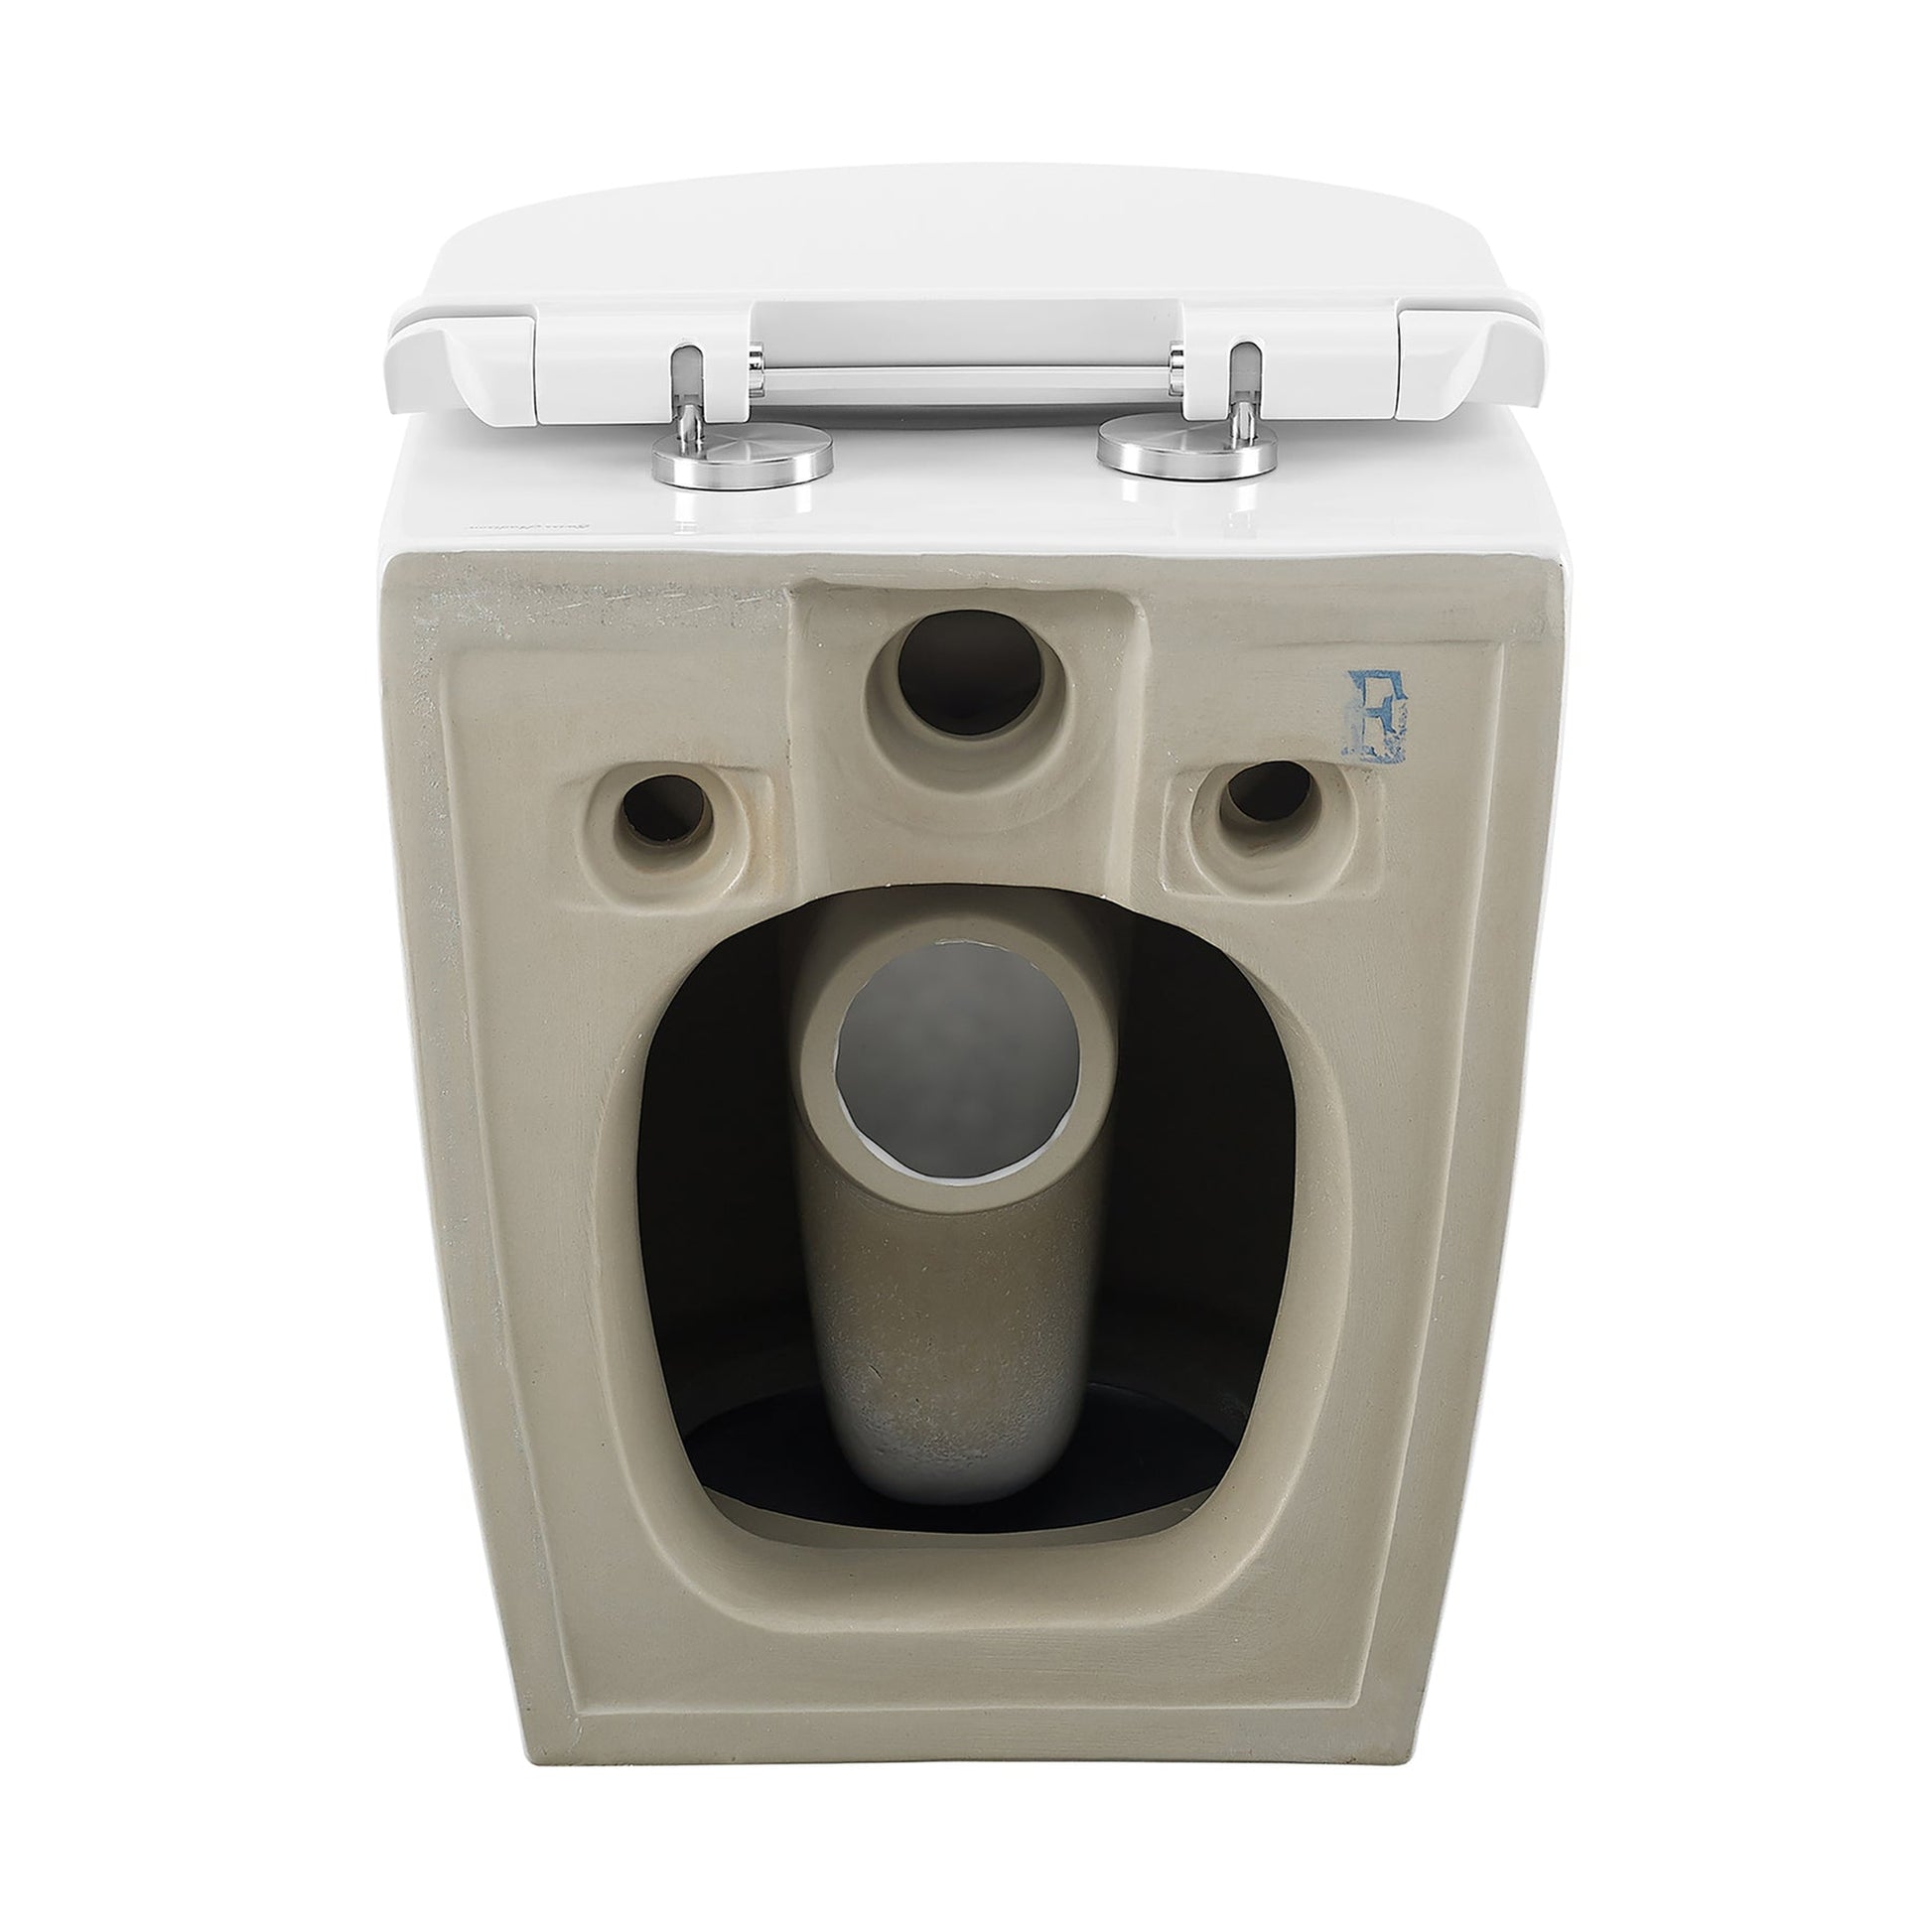 Swiss Madison St. Tropez 14" x 14" White Elongated Wall-Hung Toilet Bundle With In-Wall Carrier Tank and 1.1/1.6 GPF Dual-Flush Matte Chrome Wall Actuator Plate